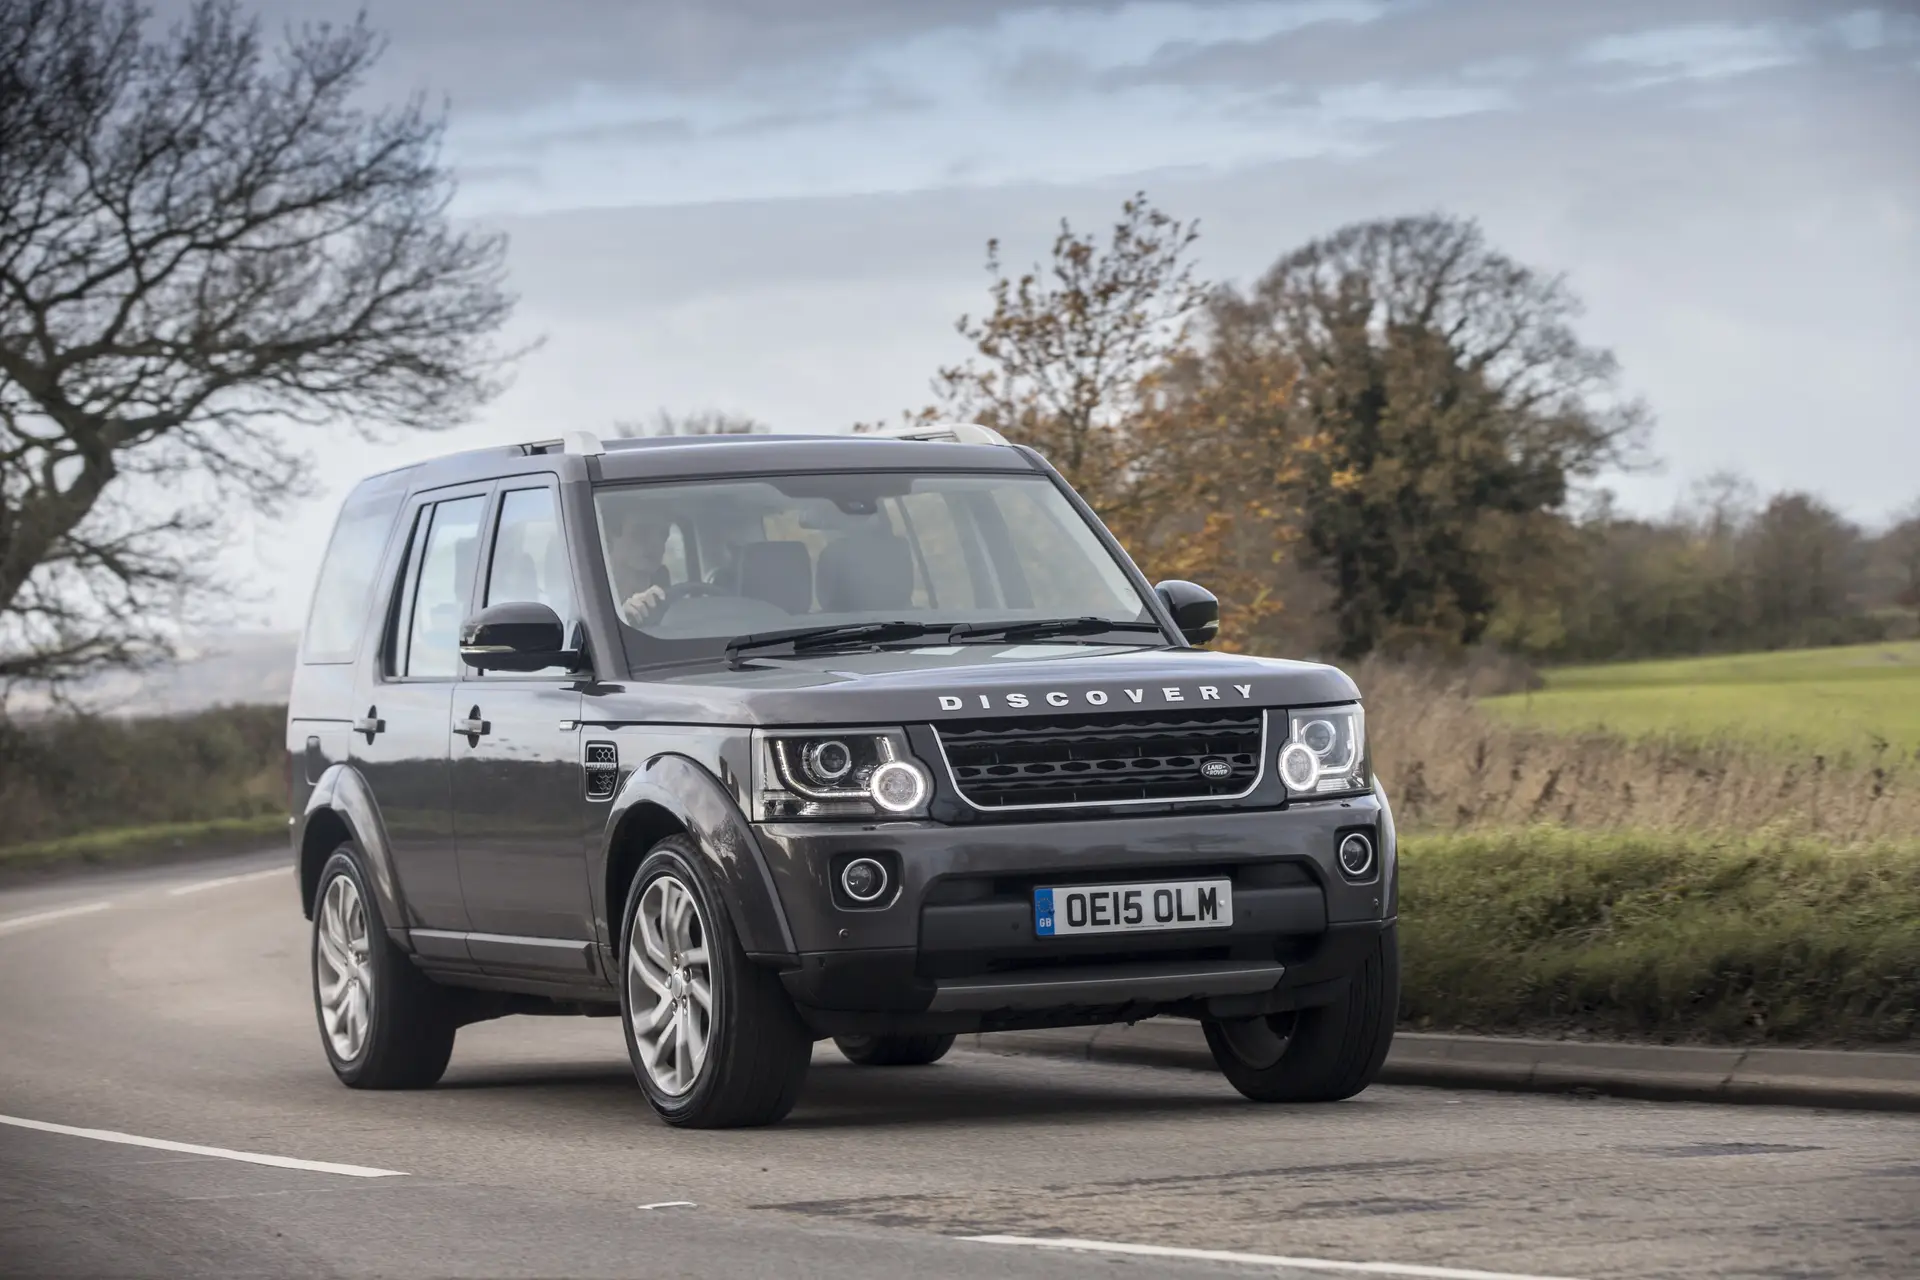 Land Rover Discovery 4 (2009-2017) Review: Exterior front three quarter photo of the Land Rover Discovery 4 on the road